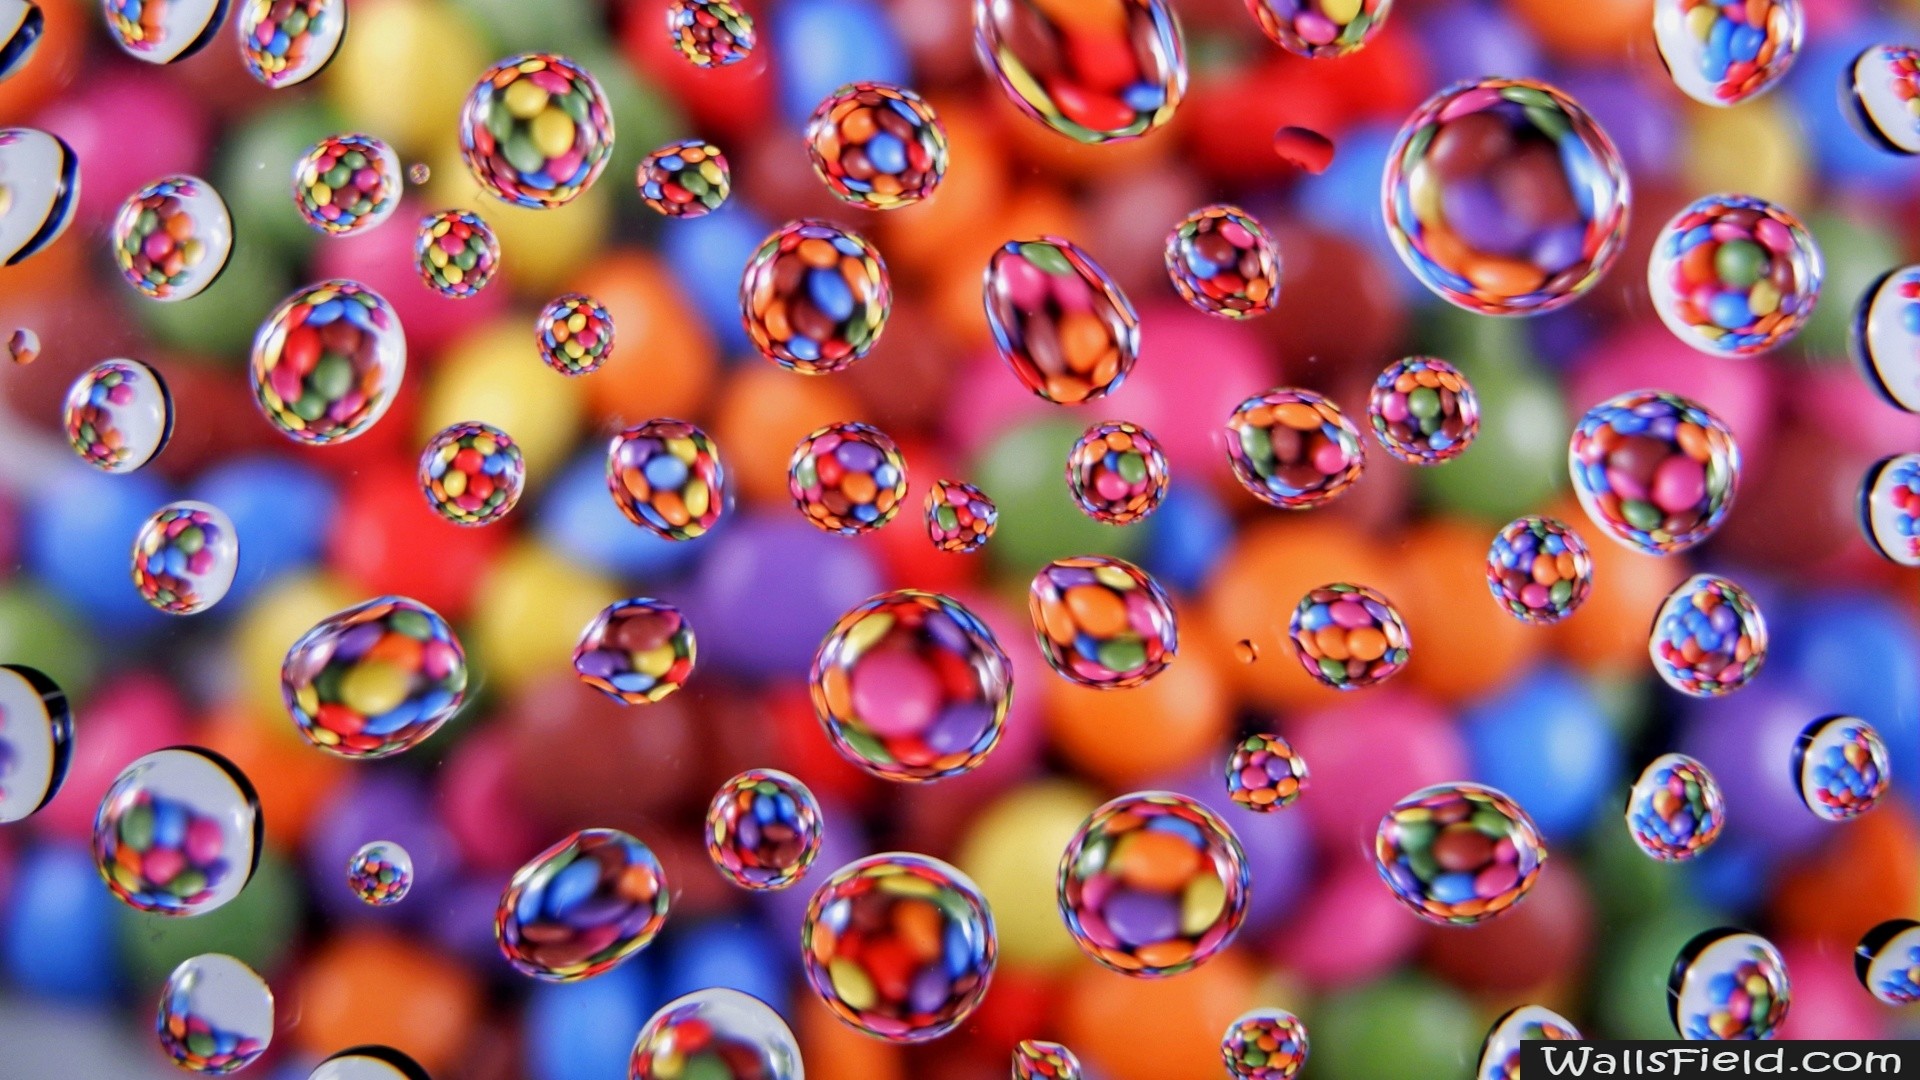 1920x1080 You can view, download and comment on Colorful Smarties free hd wallpapers  for your desktop